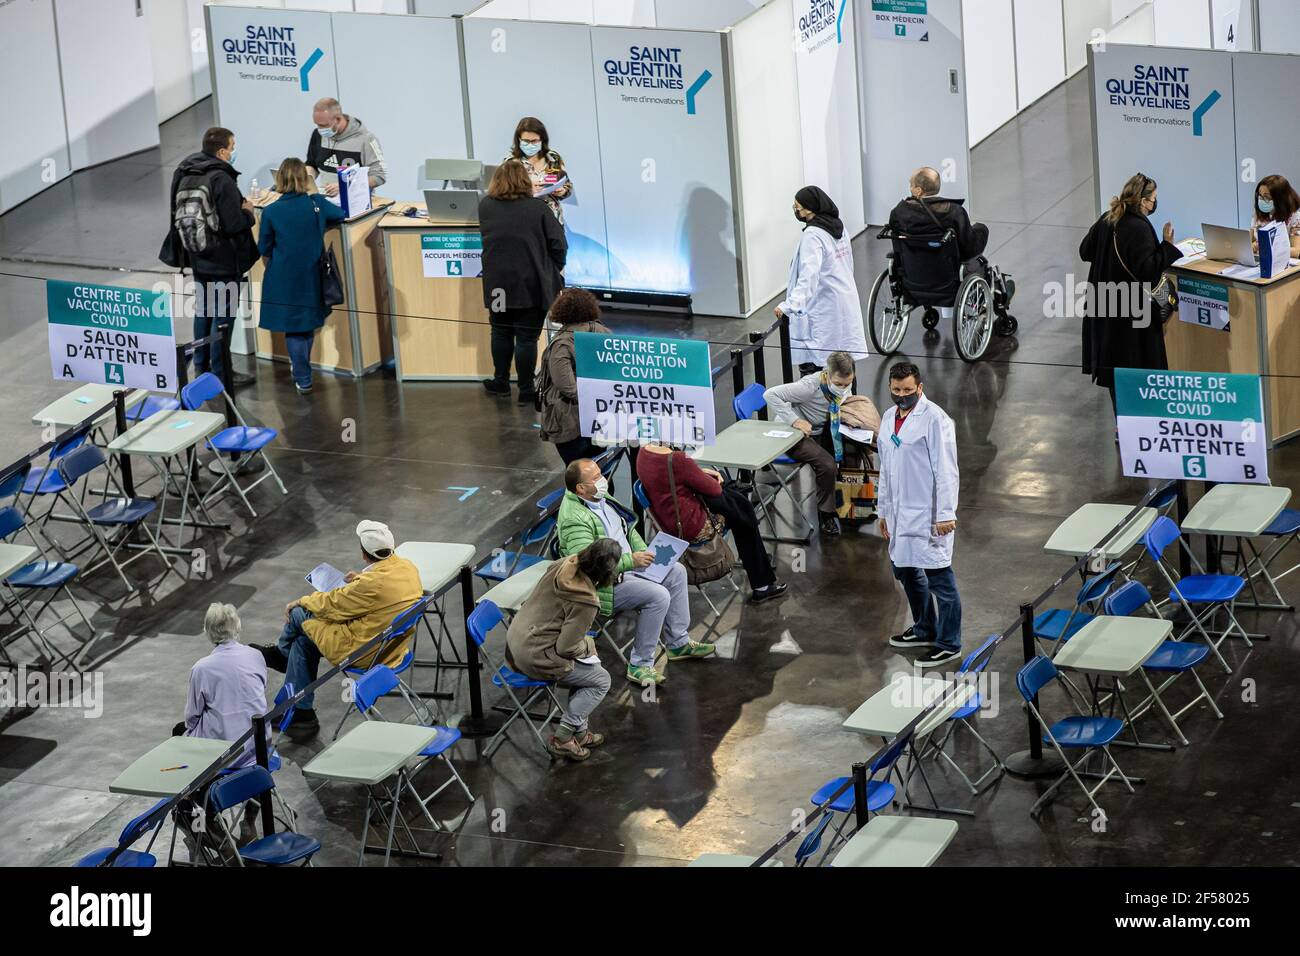 (210324) -- PARIS, March 24, 2021 (Xinhua) -- People wait in a COVID-19 vaccination center at the National Velodrome de Saint-Quentin-en-Yvelines in Saint-Quentin-en-Yvelines, France, on March 24, 2021. French President Emmanuel Macron on Tuesday stressed the importance of vaccination as the country's COVID-19 cases kept rising. Since the start of the vaccination campaign in France, nearly 6.6 million people, or about 12.6 percent of the adult population, have received at least one injection, and over 2.5 million have received two injections, according to the Health Ministry. (Photo by Aurelie Stock Photo